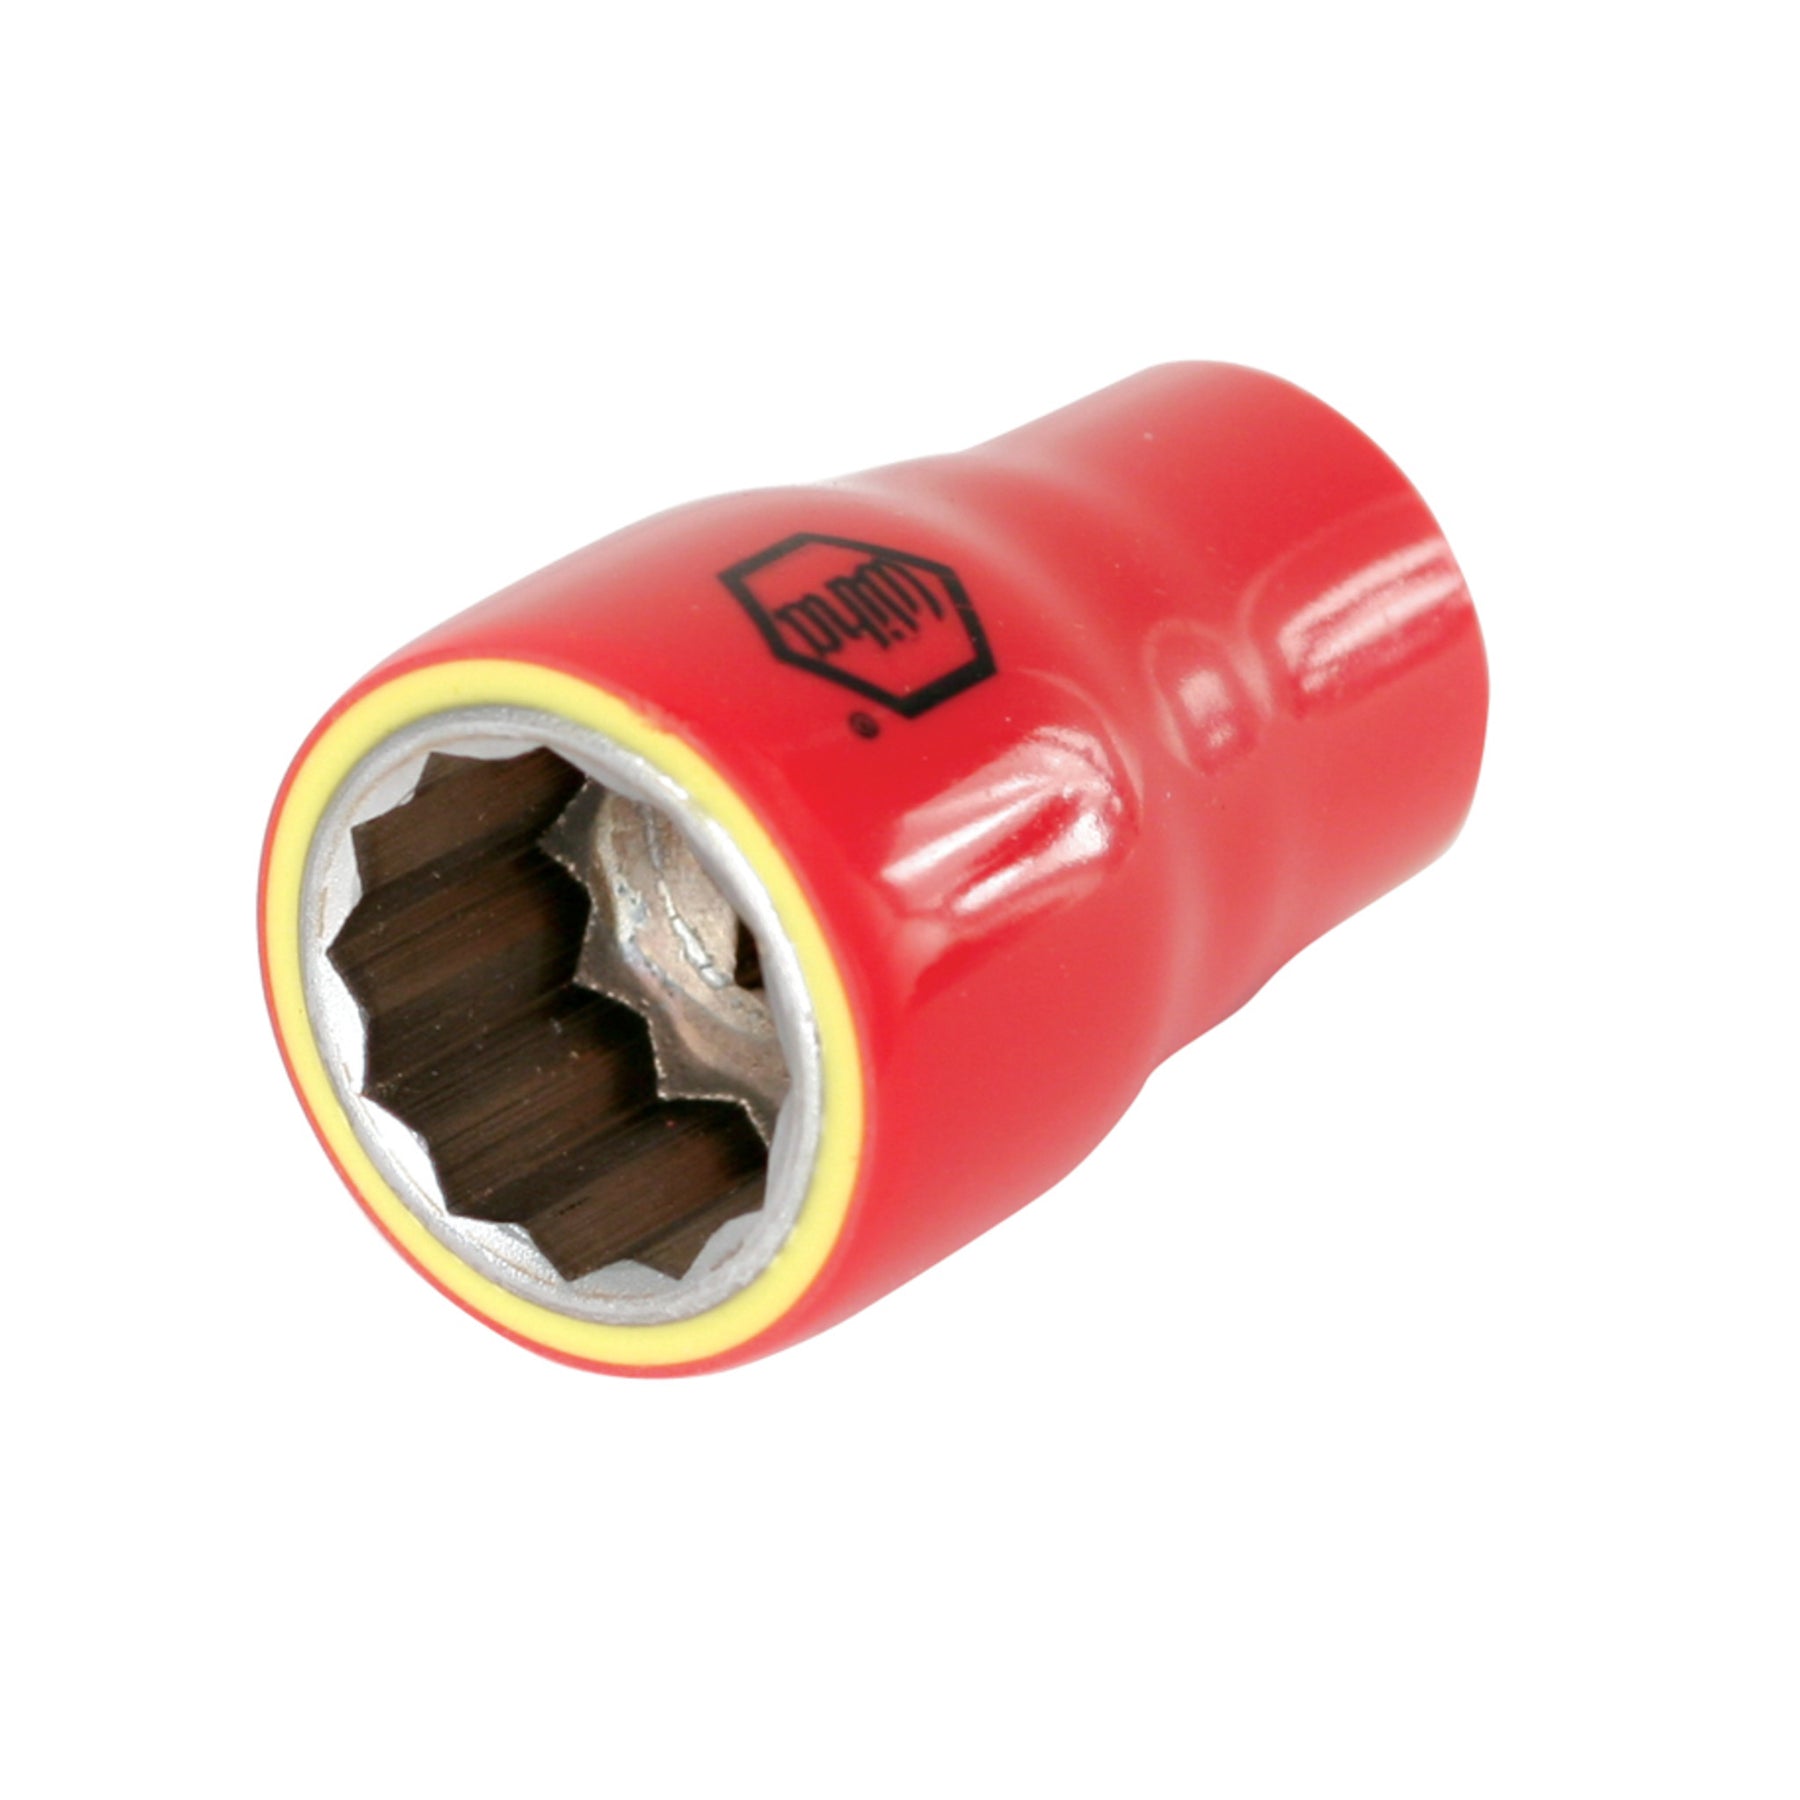 Insulated Socket 1/2" Drive 23mm